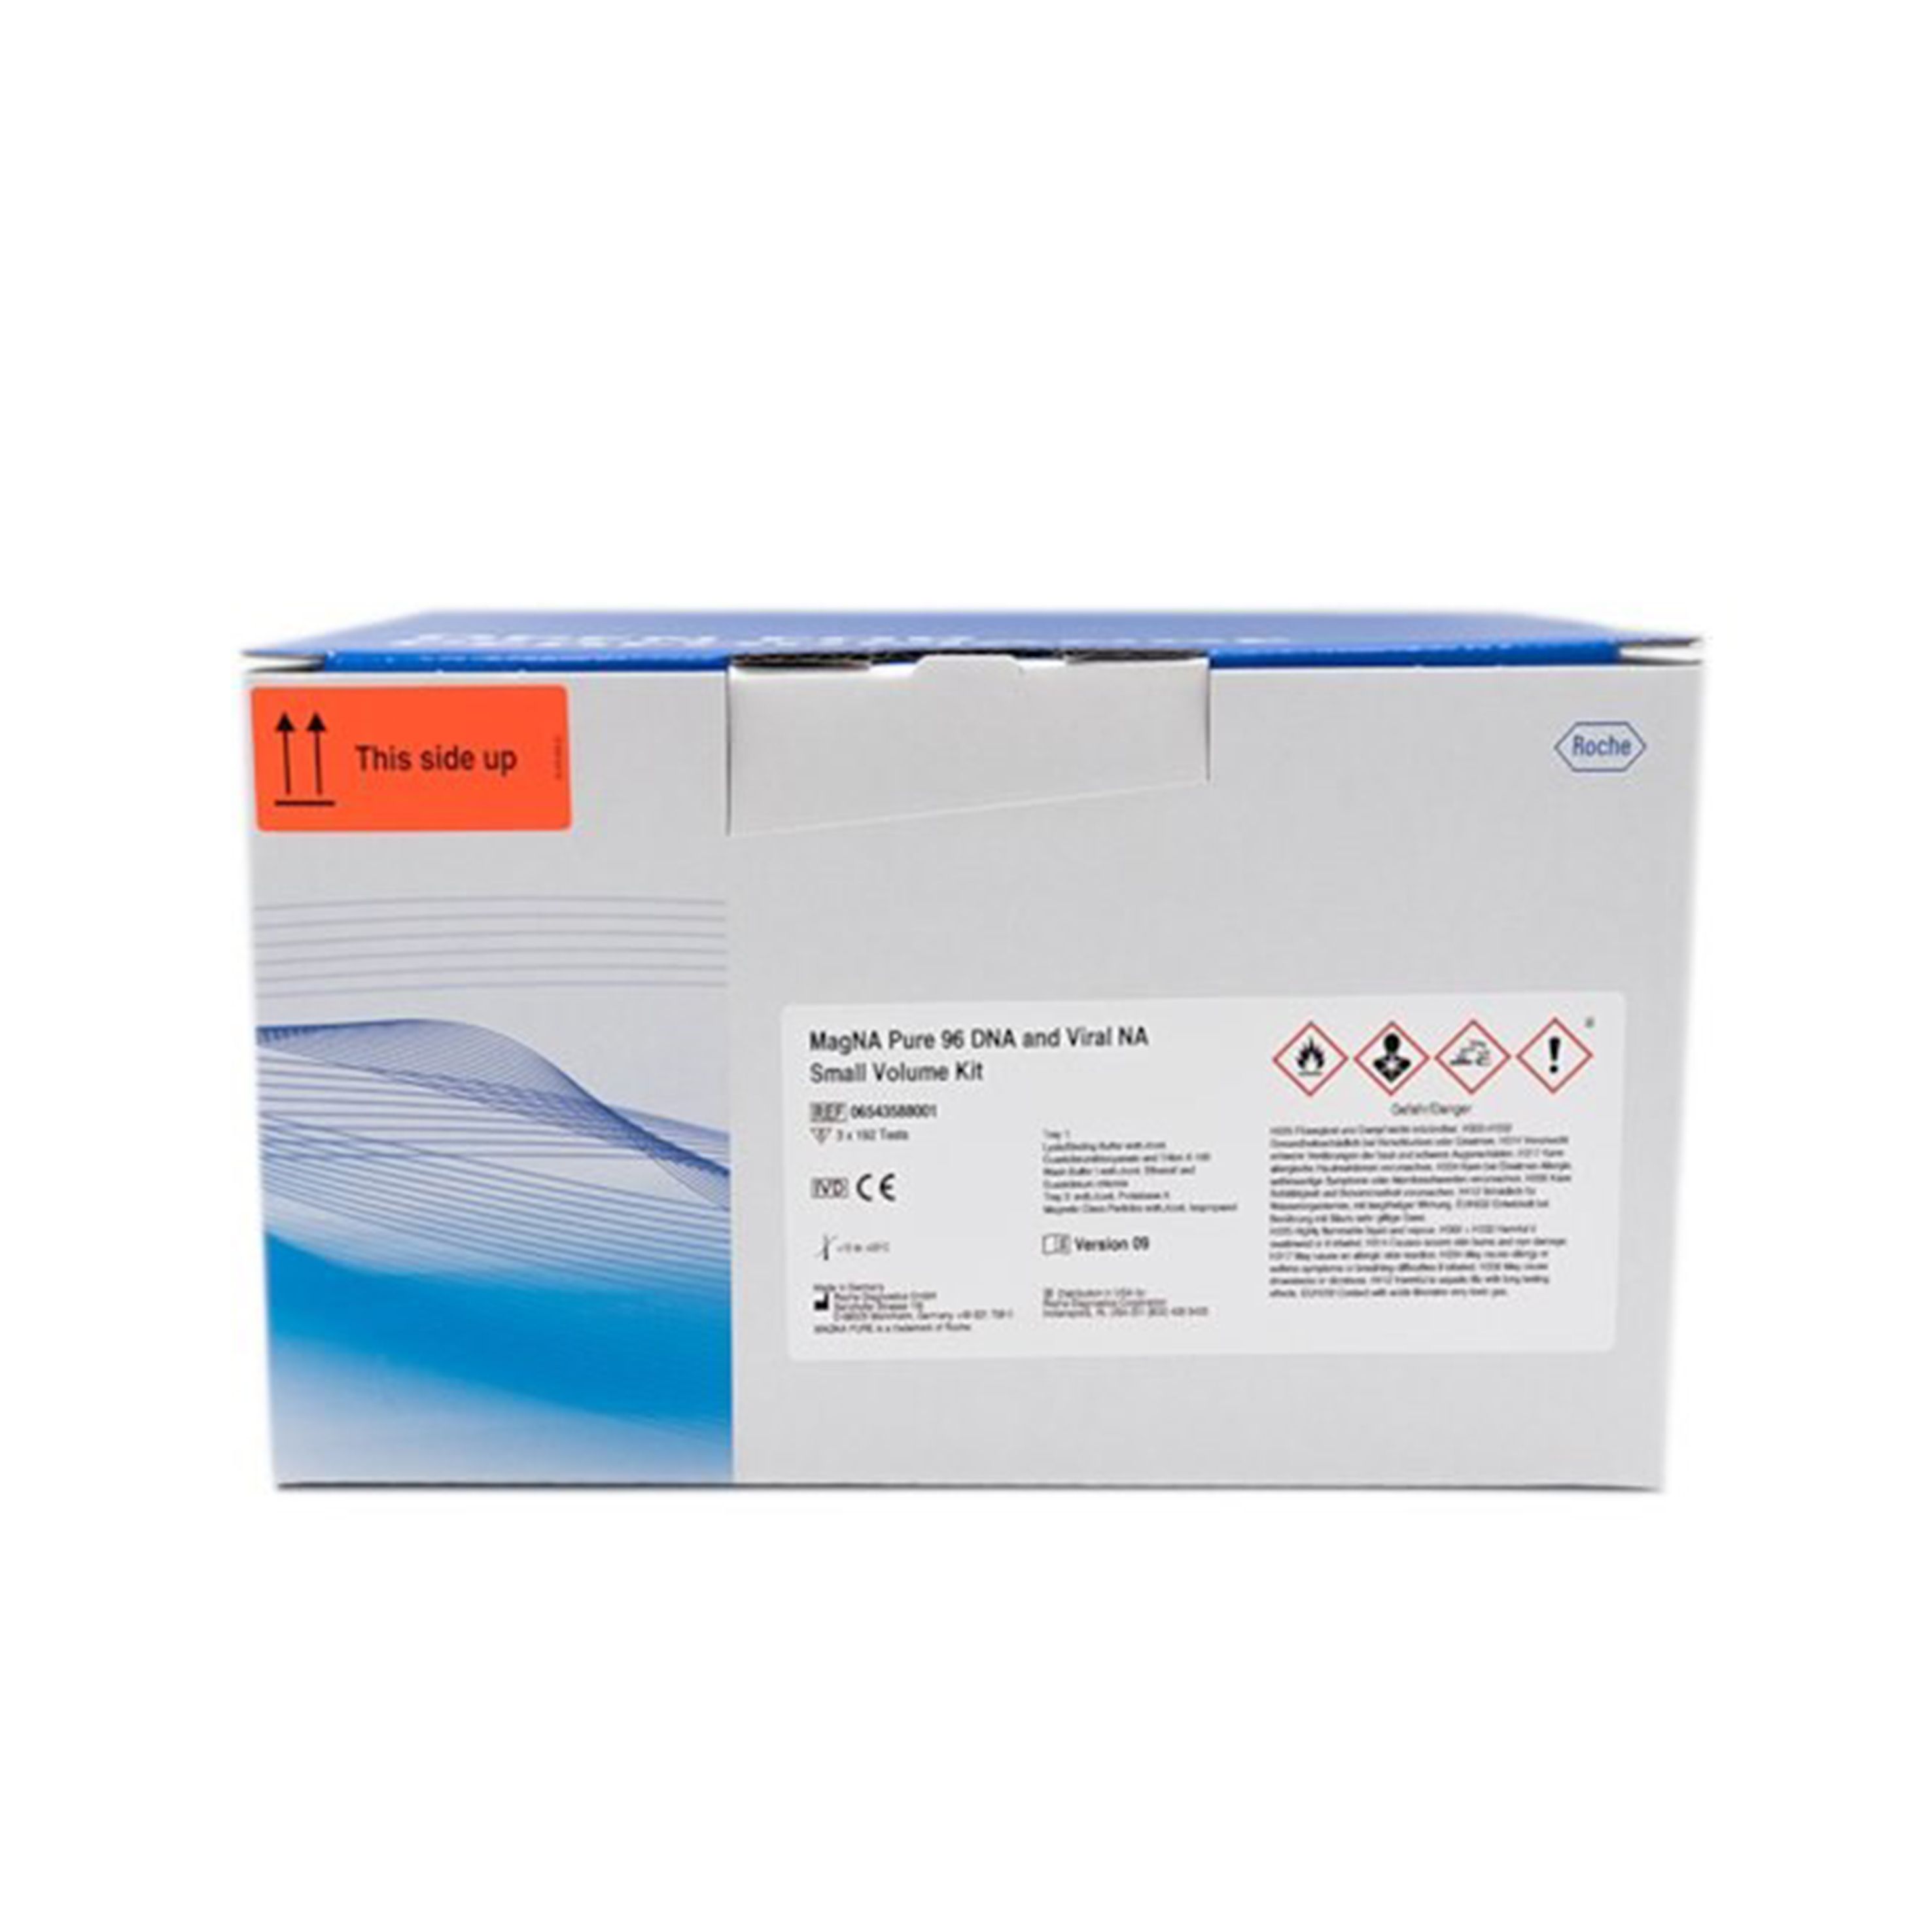 Roche 6543588001 MagNA Pure 96 DNA and Viral NA Small Volume Kit